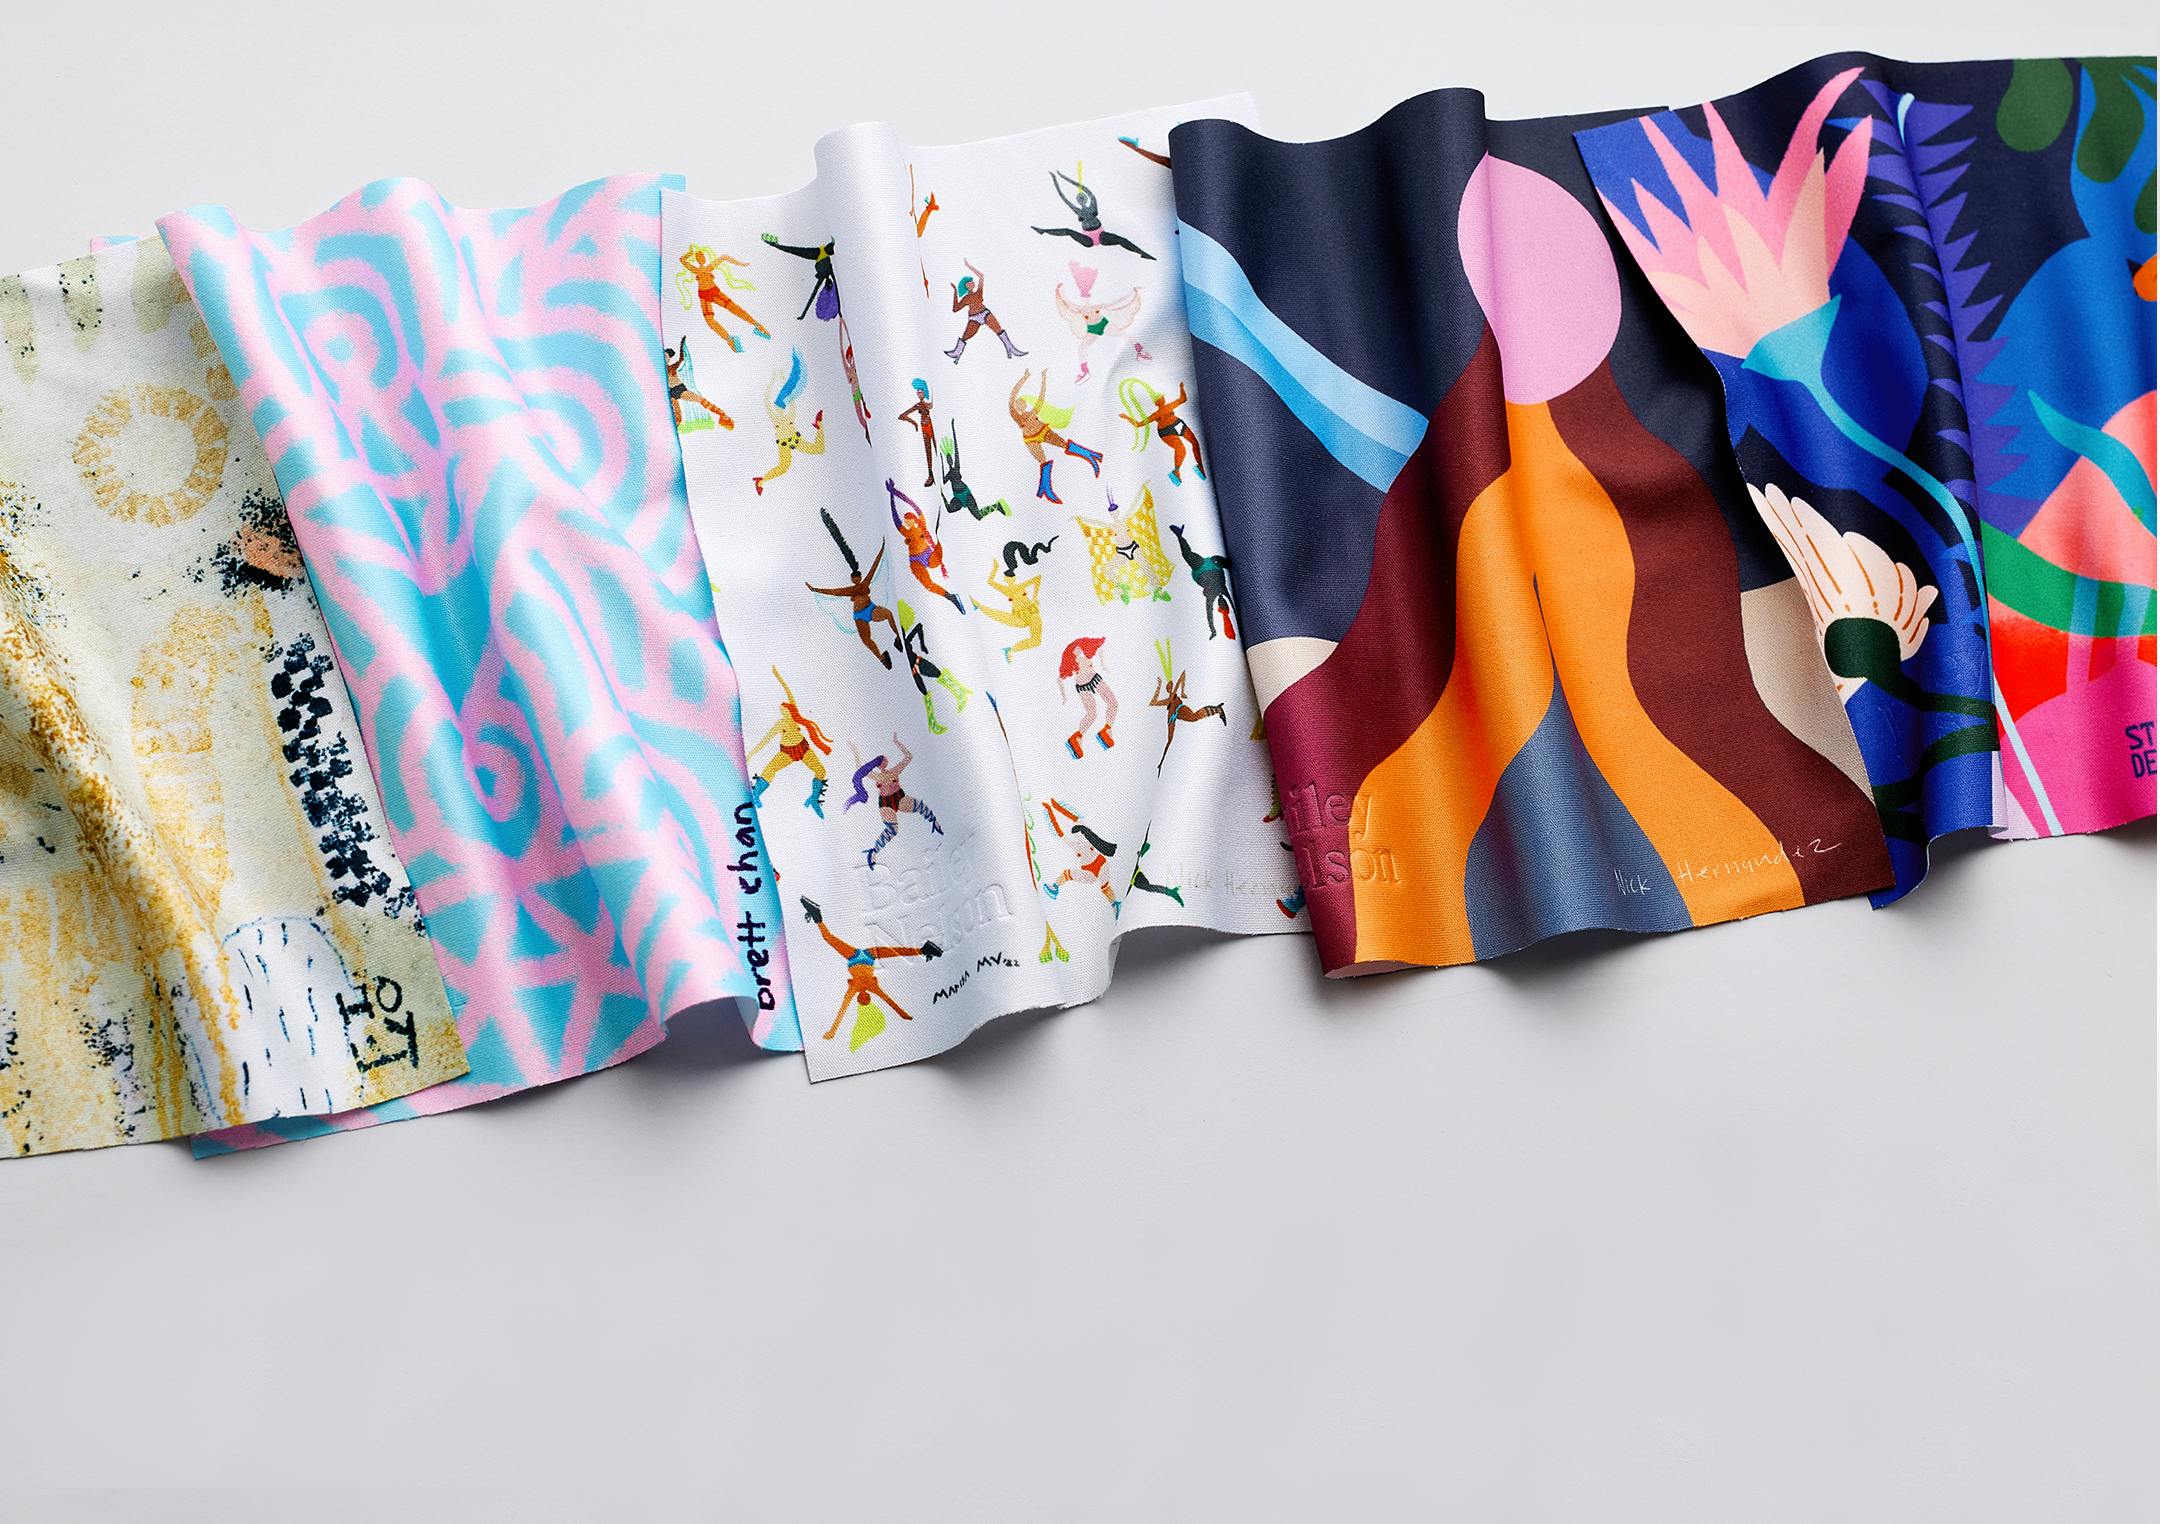 An image of 5 different custom designed lens cloths for Bailey Nelson by Australian artists